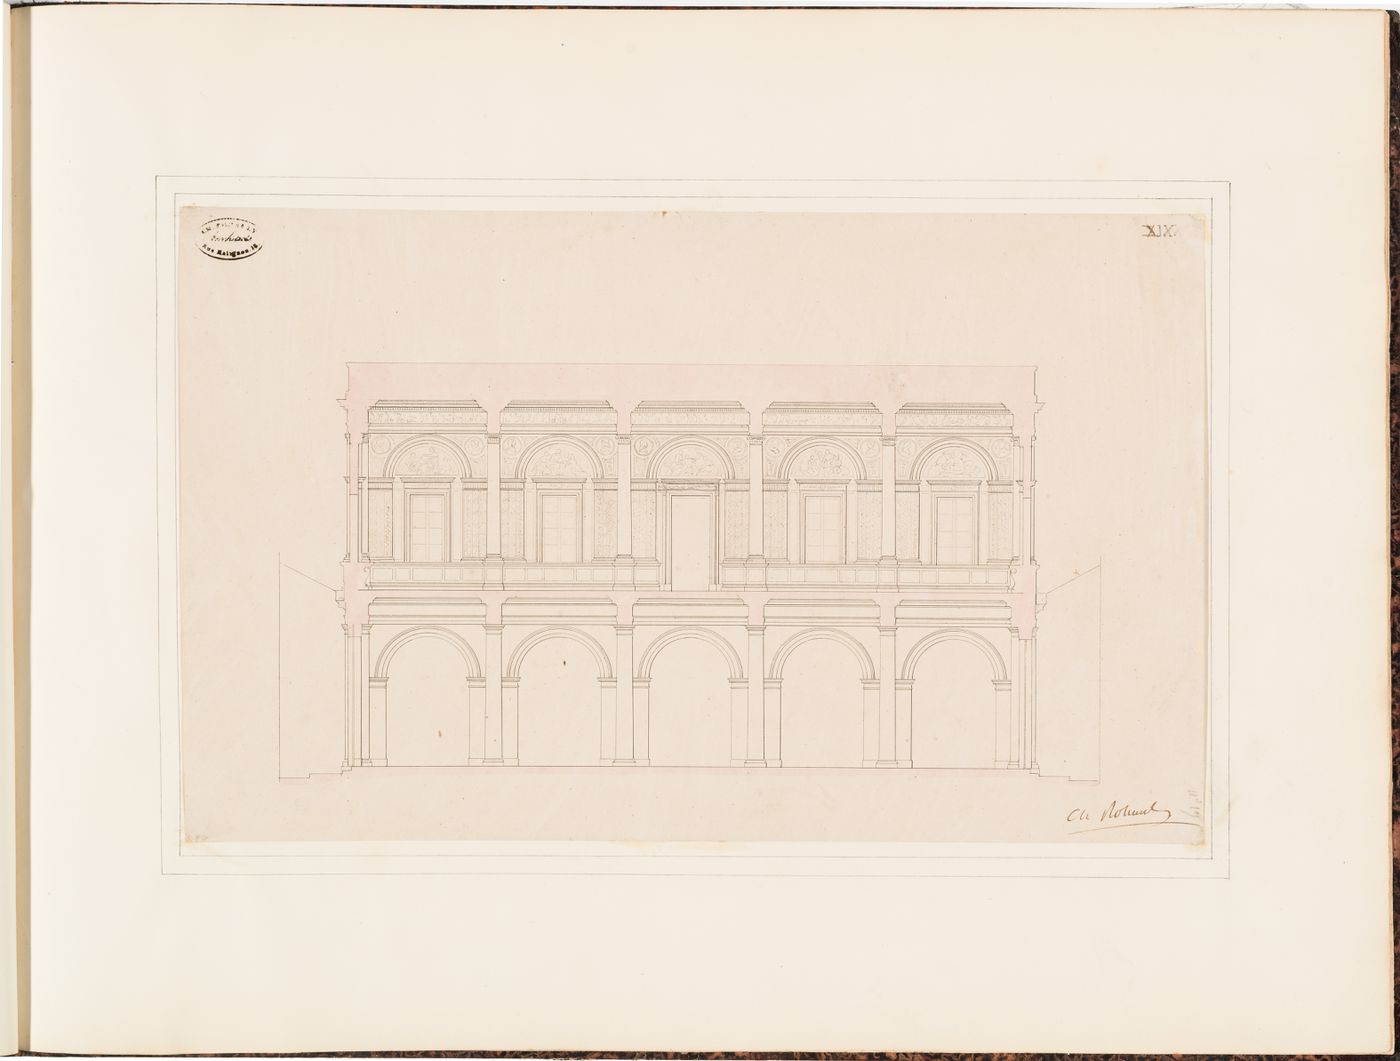 Longitudinal section for the "foyer" of the Théâtre Royal Italien showing the interior wall elevation